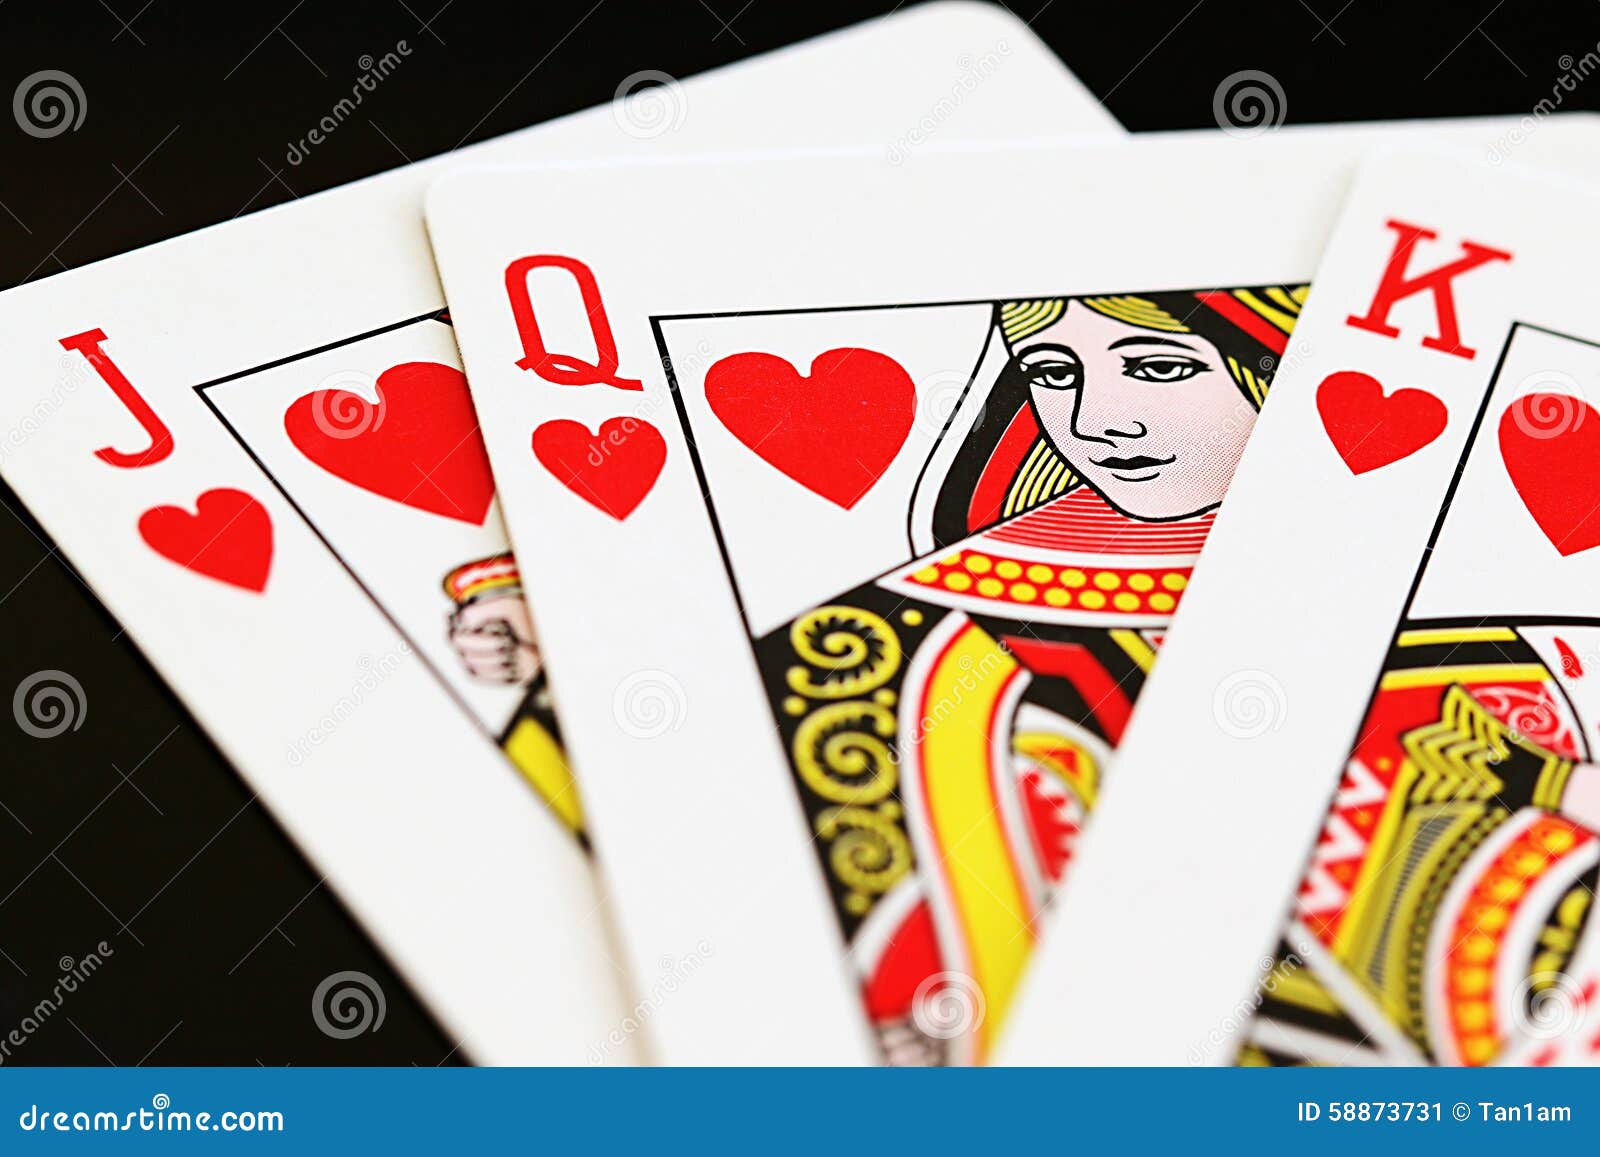 Queen of Hearts stock image. Image of jack, cards, game - 58873731